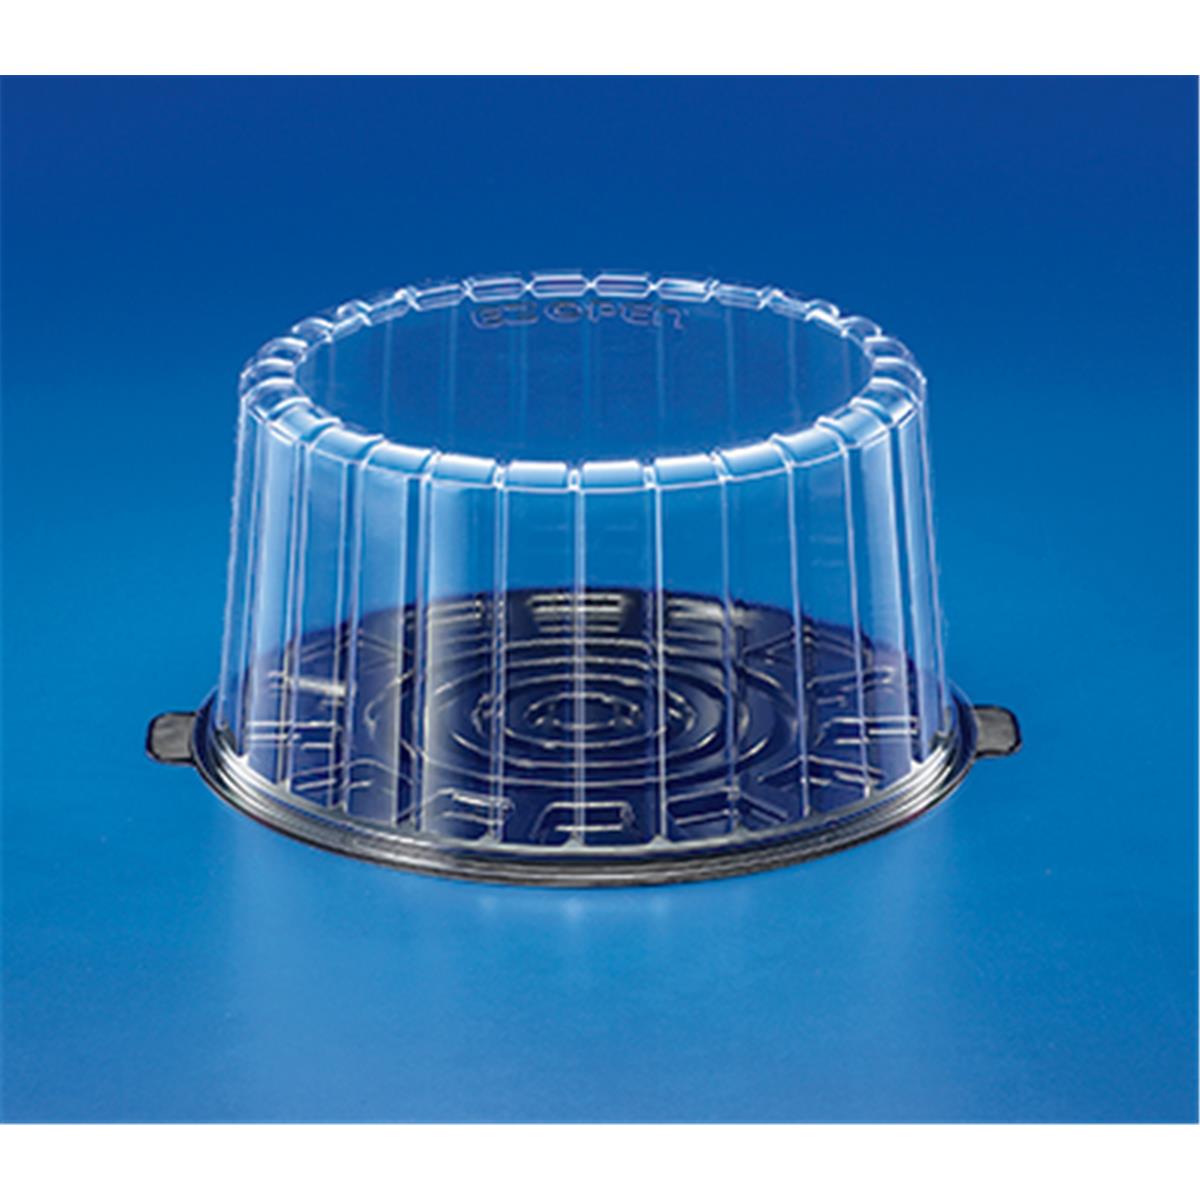 1009bk 9 In. Double Layer Cake Container Set Pete, Clear Top & Black Base 2 Piece - Case Of 50